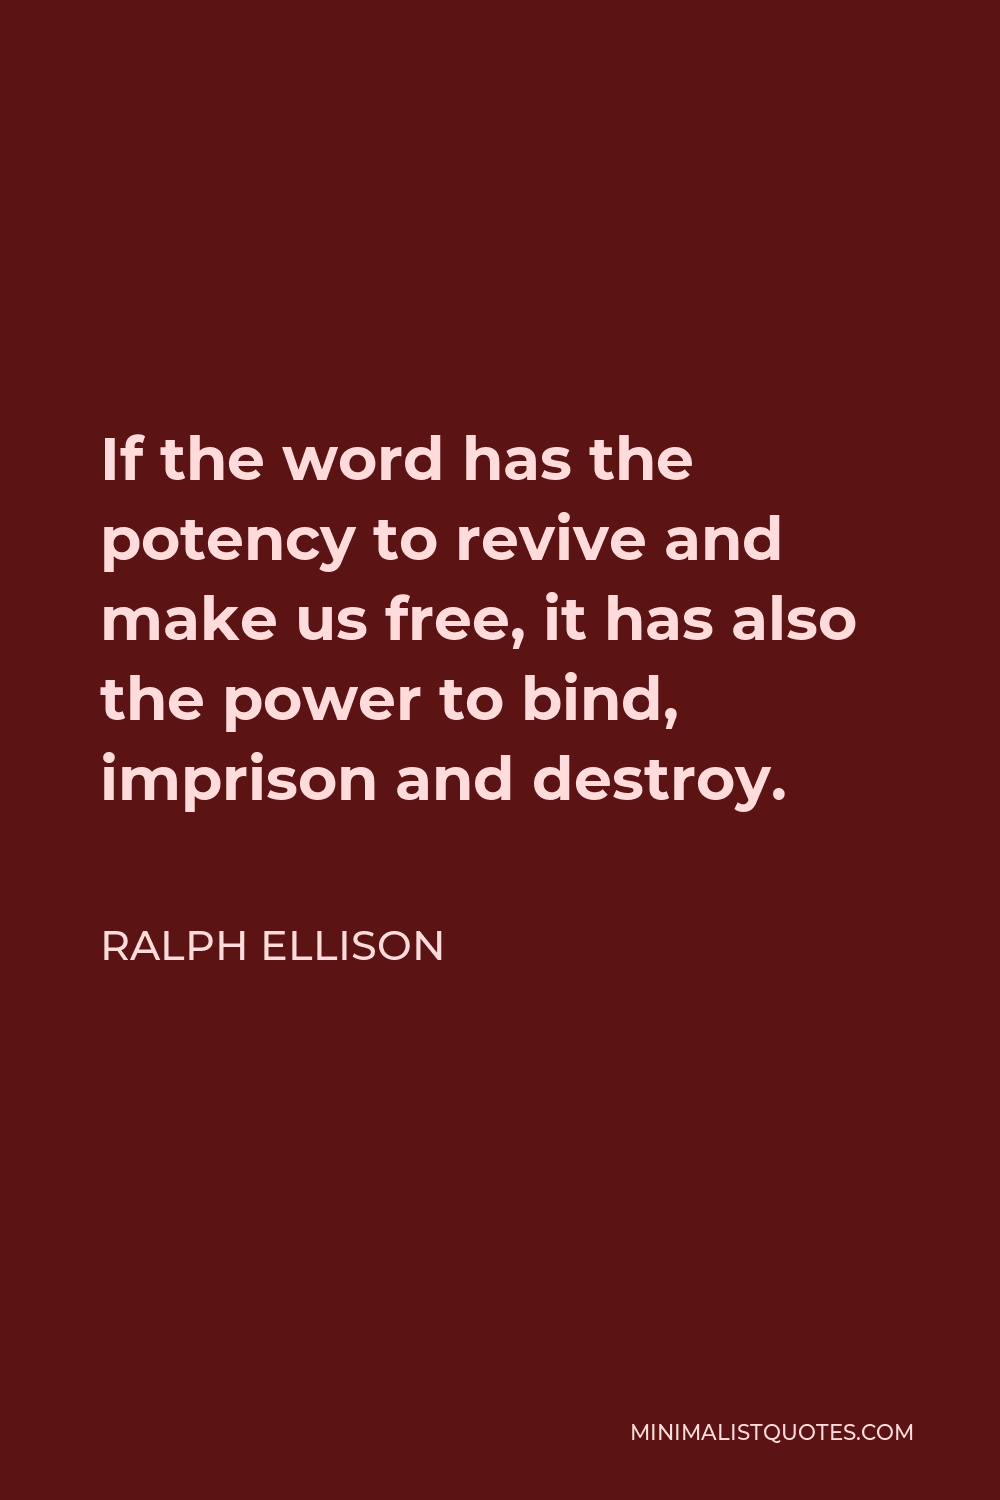 Ralph Ellison Quote - If the word has the potency to revive and make us free, it has also the power to bind, imprison and destroy.